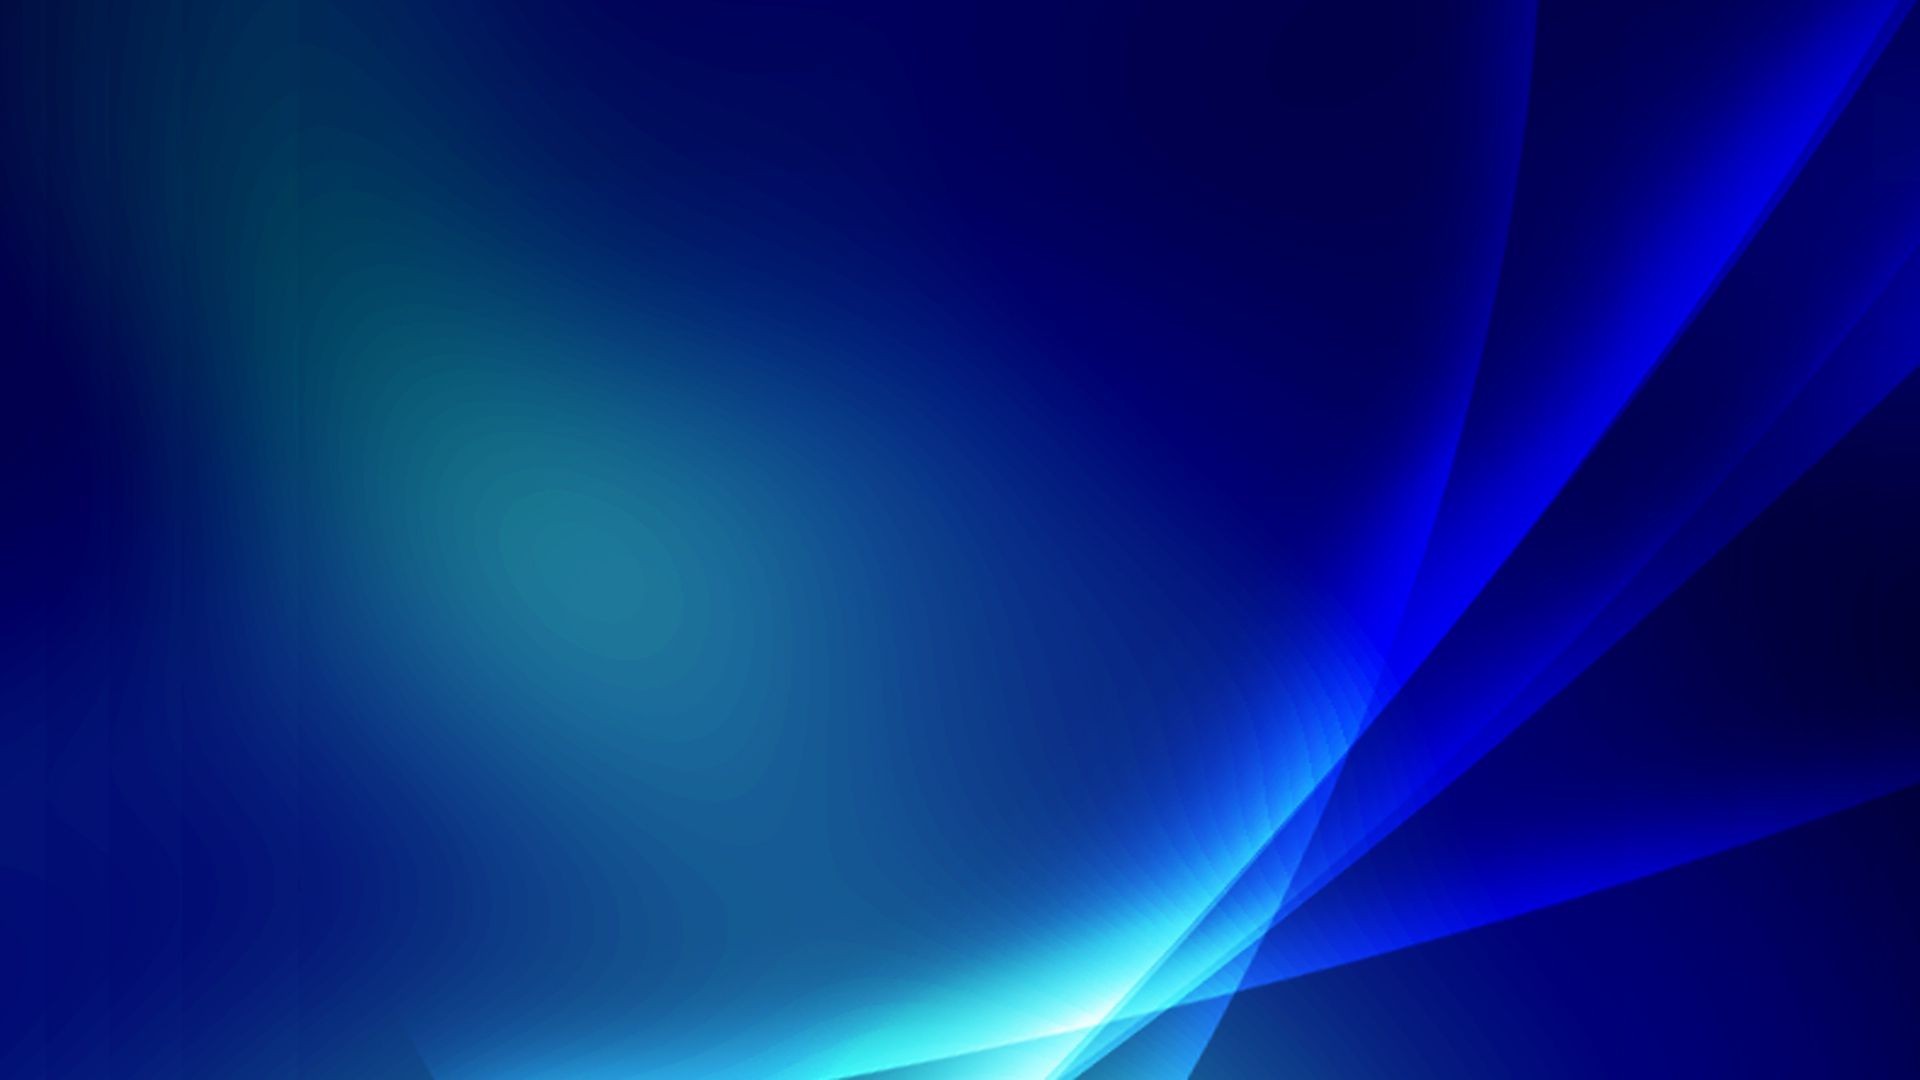 Wallpapers For > Plain Royal Blue Backgrounds - Royal Blue Light Blue Background , HD Wallpaper & Backgrounds